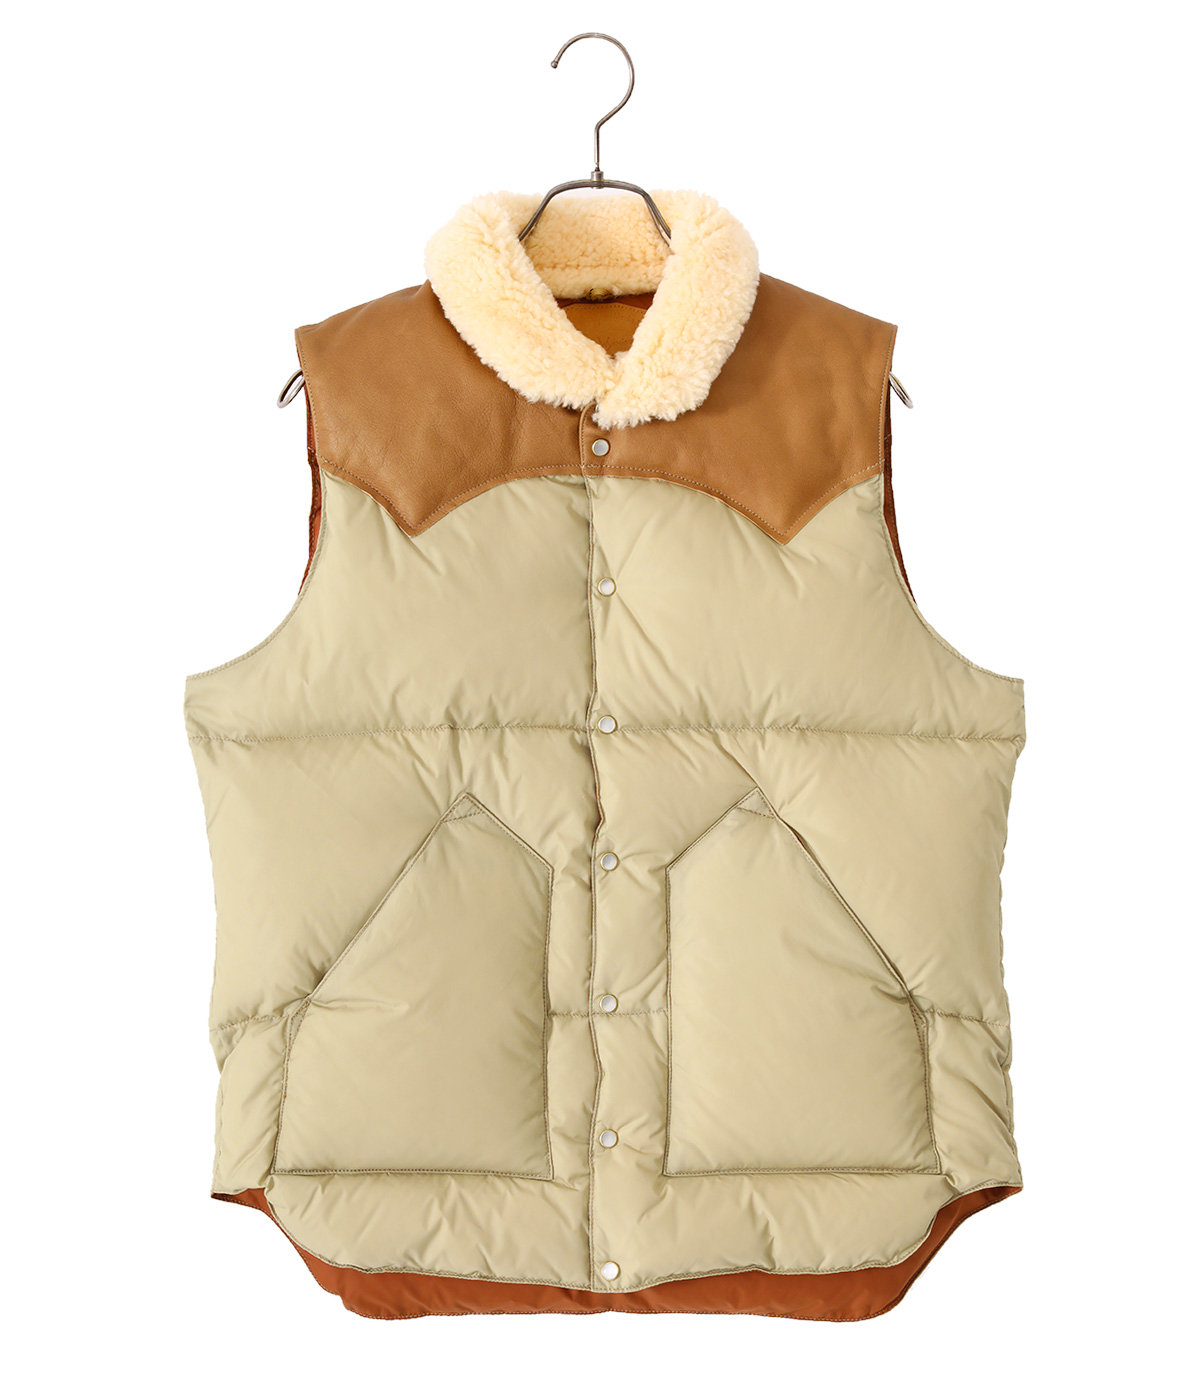 ROCKY MOUNTAIN FEATHER BED / ロッキーマウンテンフェザーベッド ： CHRISTY VEST ： 200-222-02